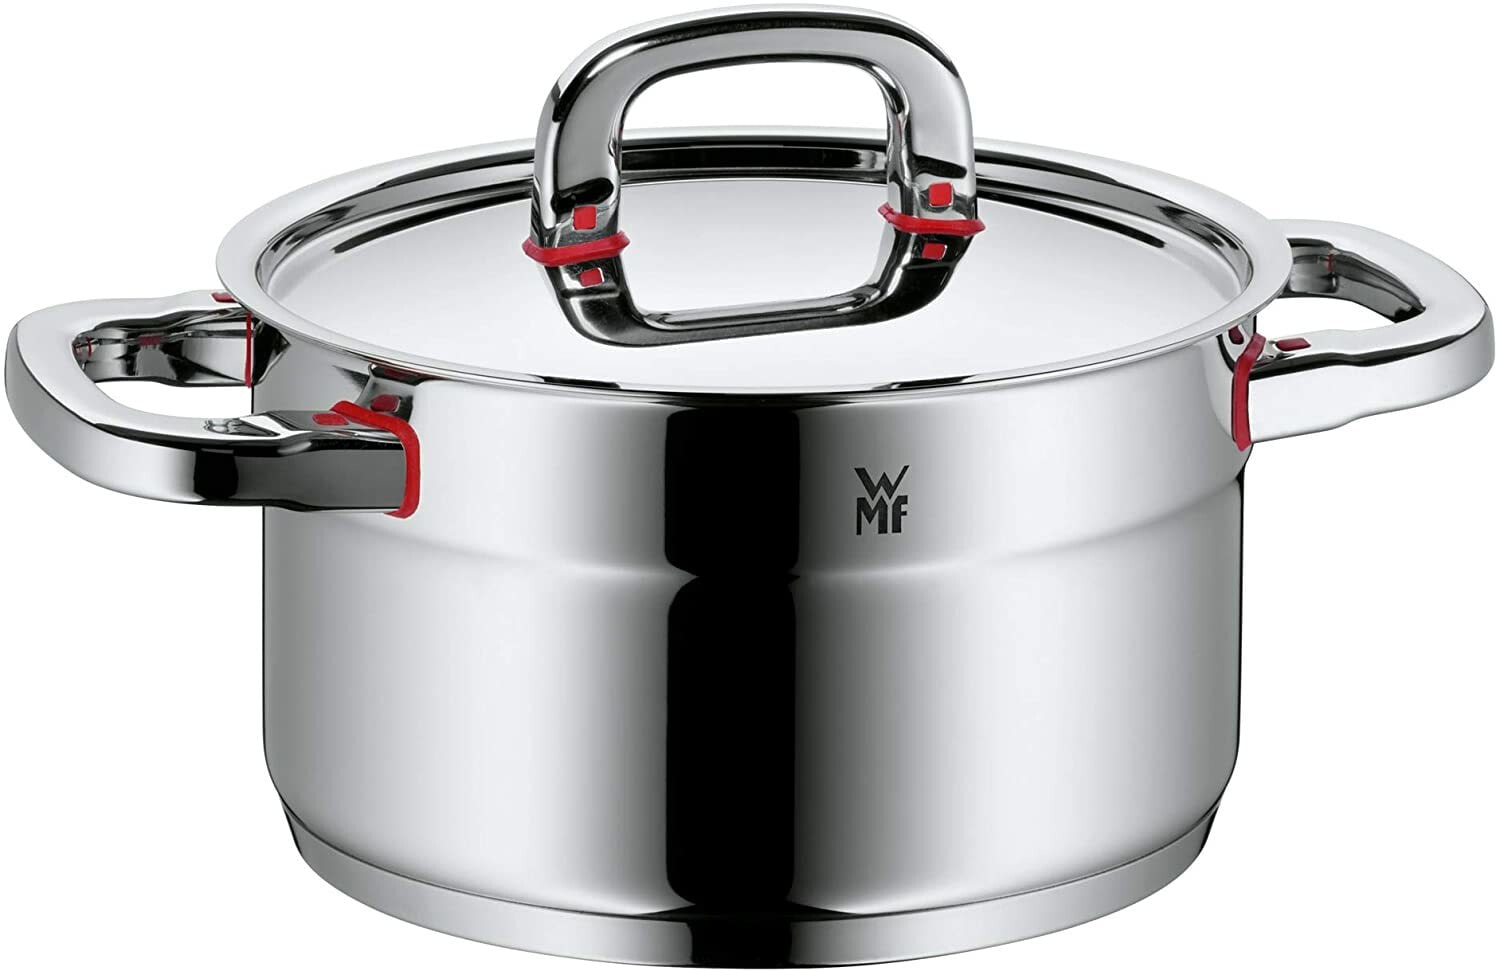 Кастрюля или ковш WMF cookware Ø 20 cm approx. 3,3l Premium One Inside scaling vapor hole Cool+ Technology metal lid Cromargan stainless steel brushed suitable for all stove tops including induction dishwasher-safe